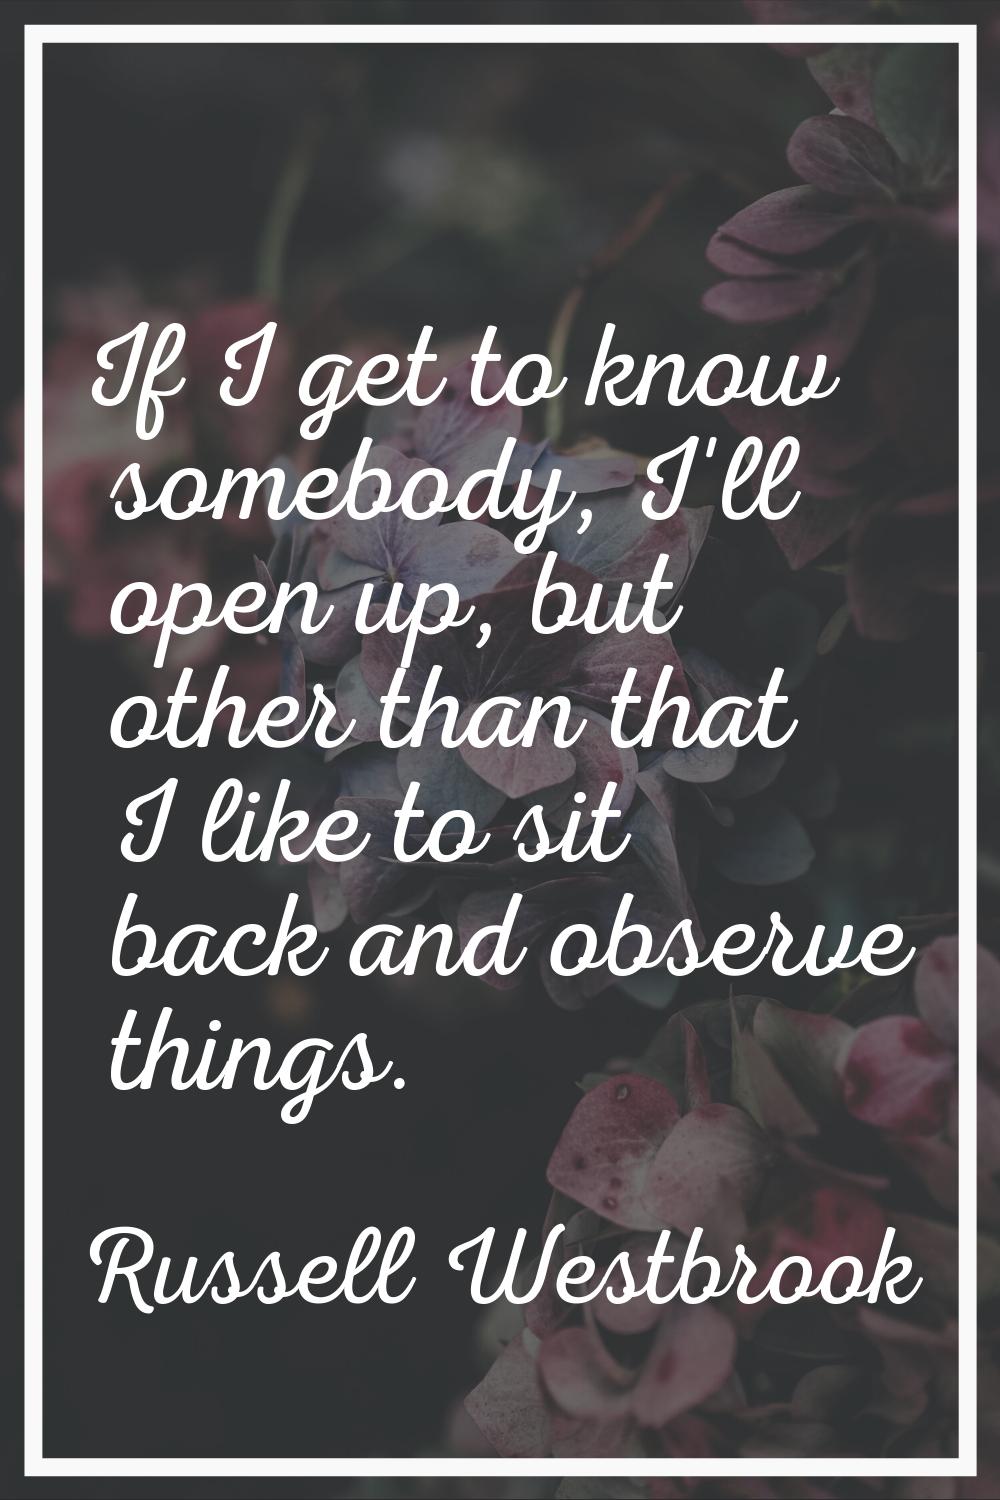 If I get to know somebody, I'll open up, but other than that I like to sit back and observe things.